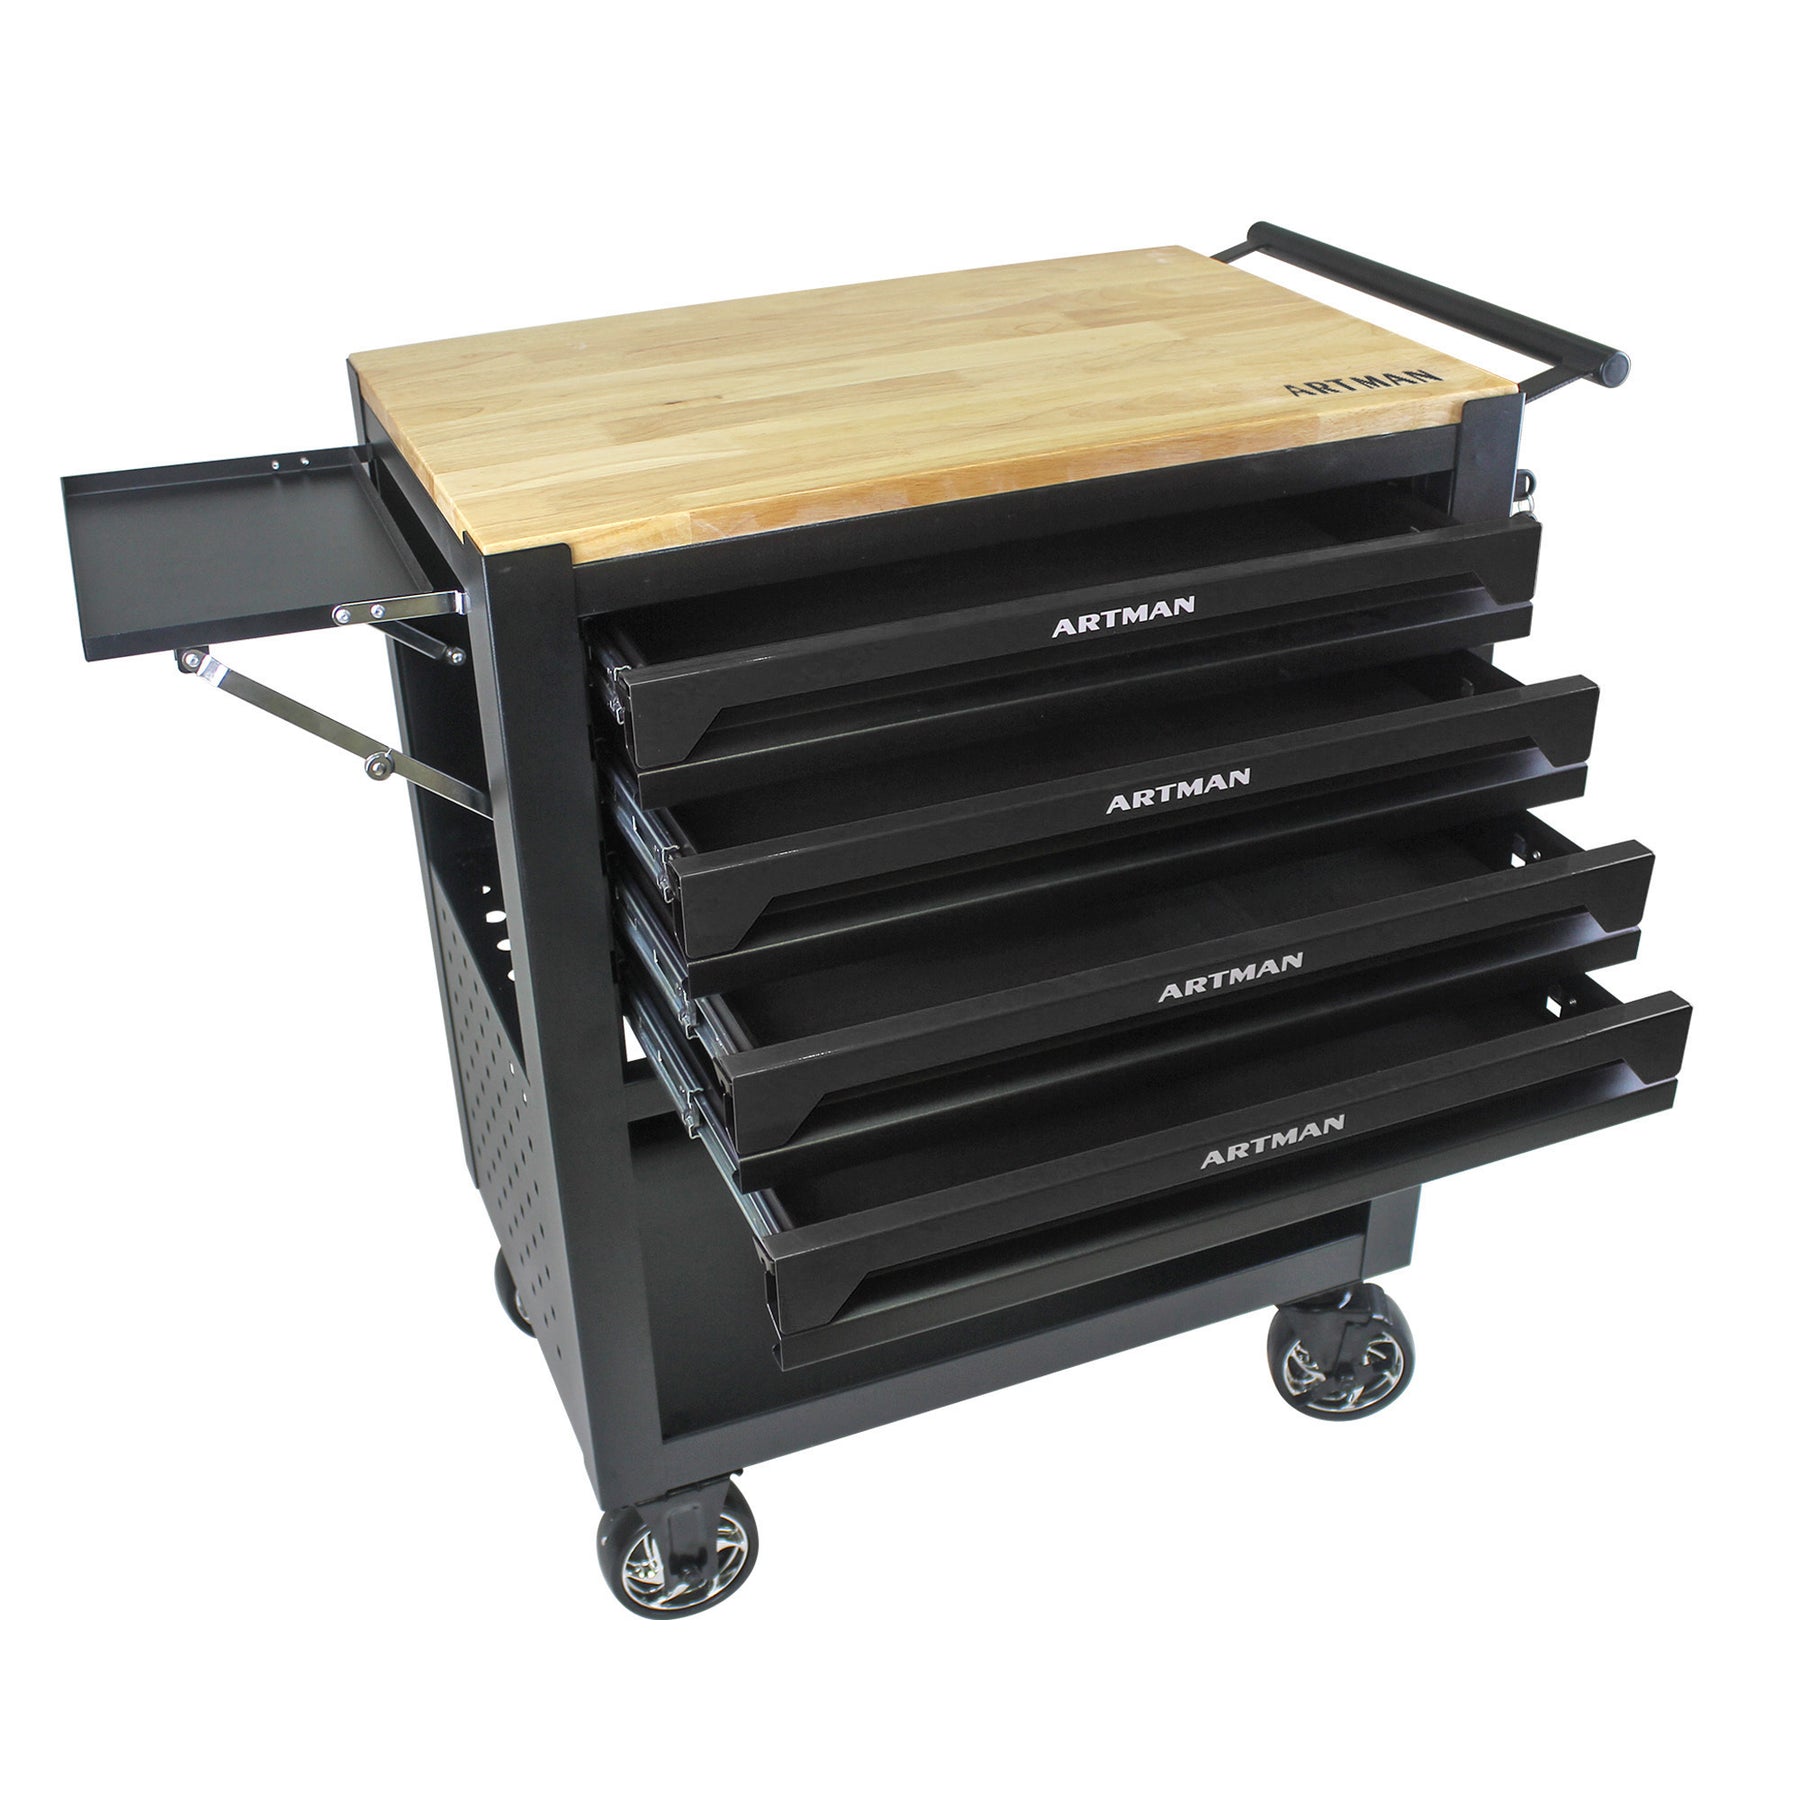 4 DRAWERS MULTIFUNCTIONAL TOOL CART WITH WHEELS AND WOODEN TOP-BLACK - Tonkn